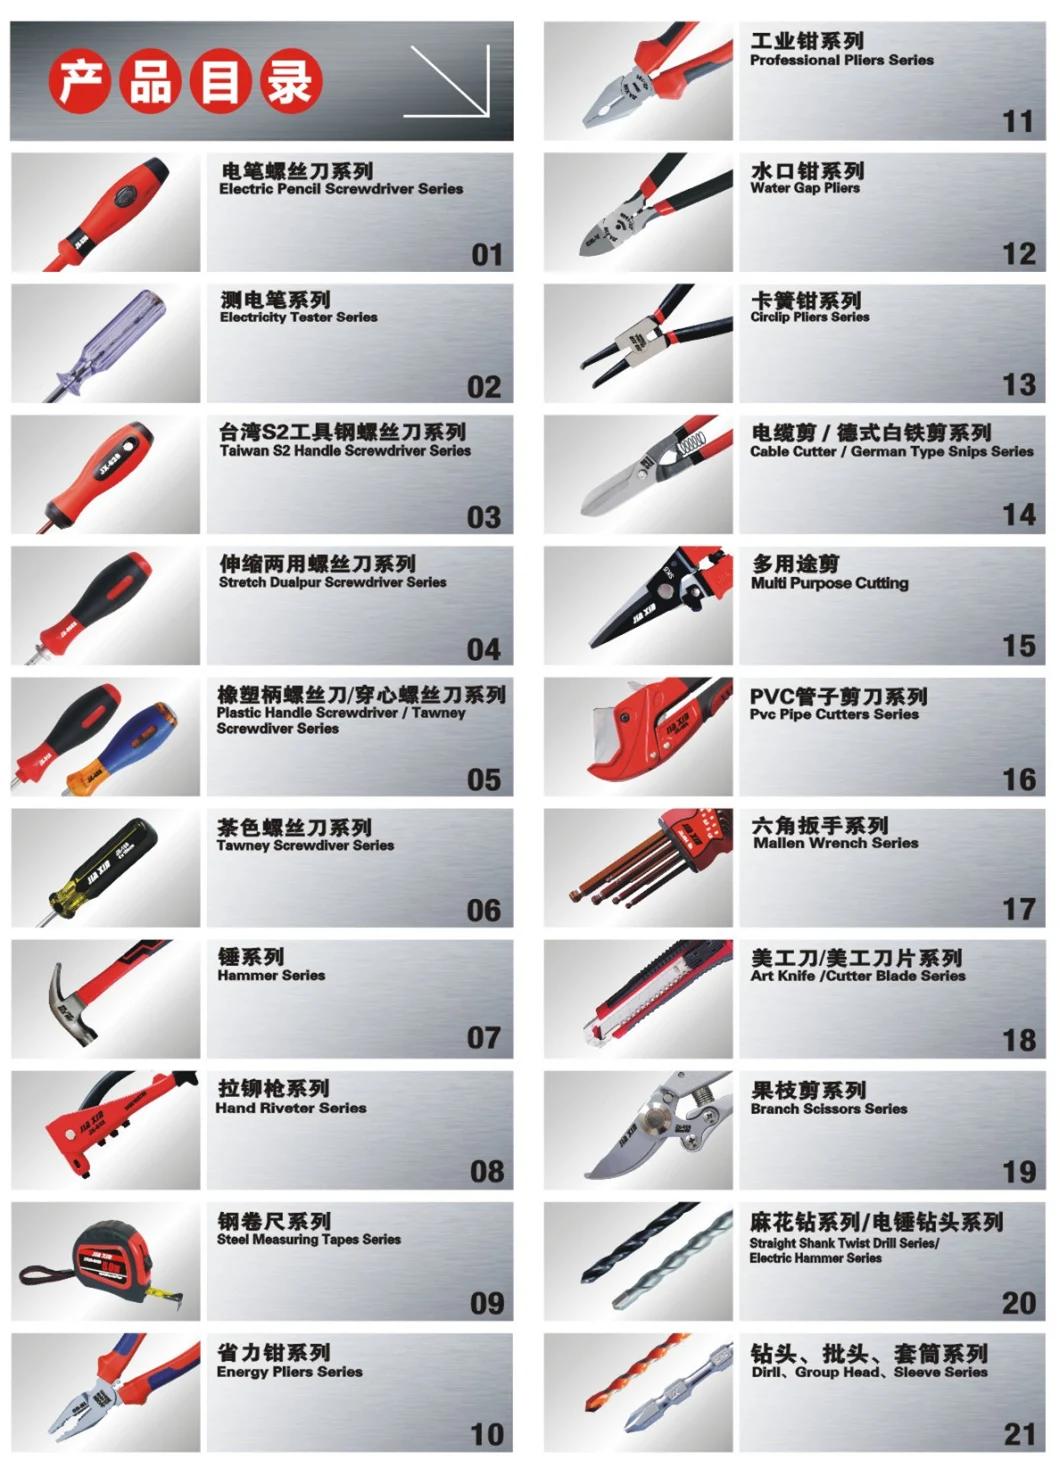 Internationally Common High Quality of Scaffolding Ratchet Wrench